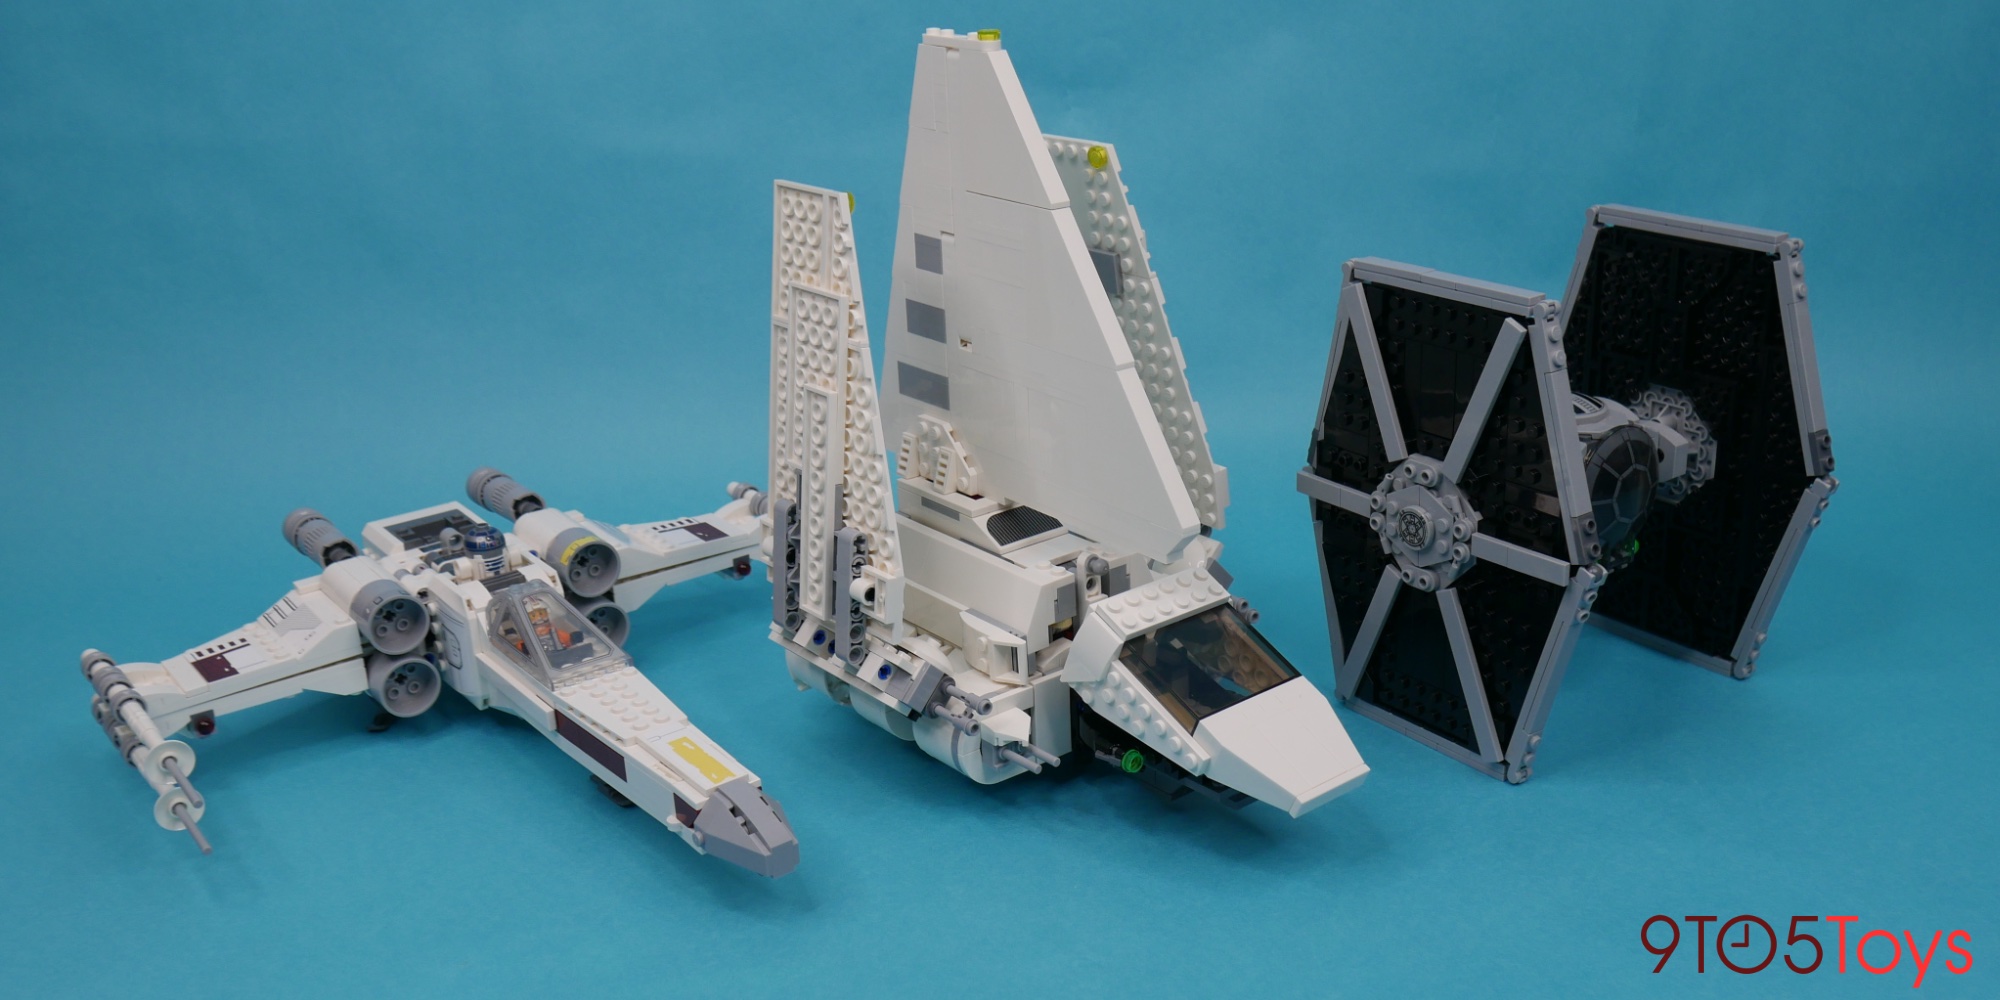 LEGO Star Wars sets see rare discounts: Shuttle, X-Wing, more from $24